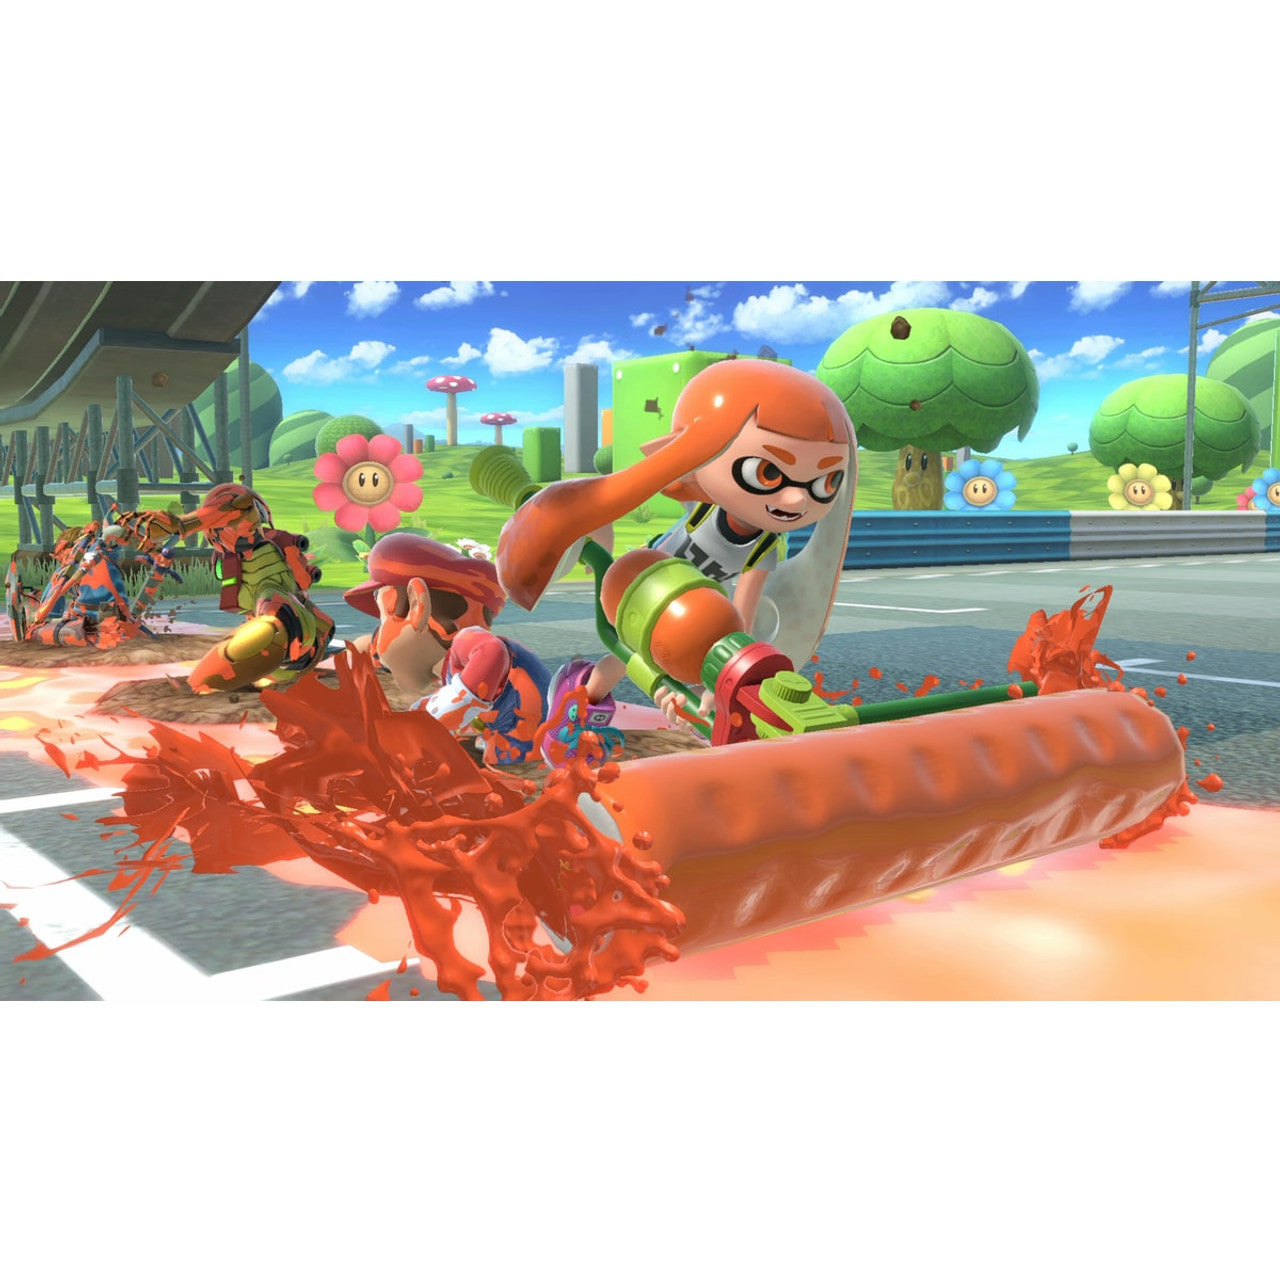 This is brand new.Legendary game worlds and fighters collide in the ultimate showdown—a new entry in the Super Smash Bros. series for the Nintendo Switch™ system! New fighters, like Inkling from the Splatoon™ series and Ridley from the Metroid™ series, make their Super Smash Bros.